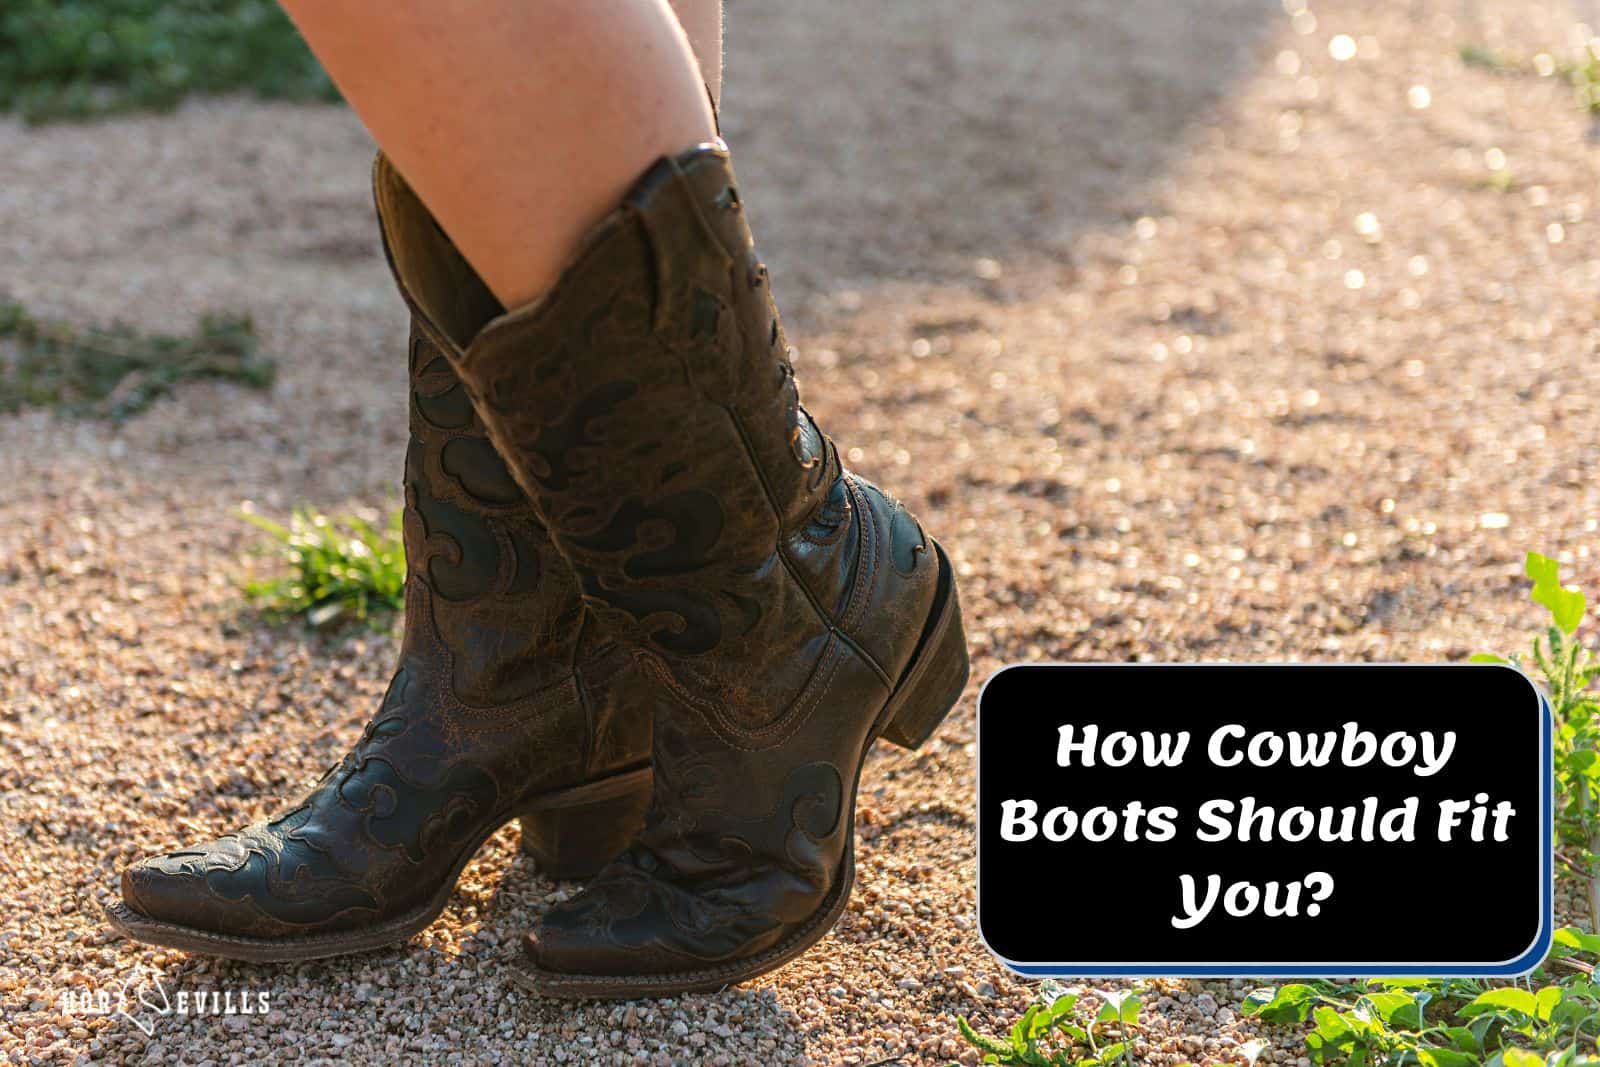 lady wearing a pair of cowboy boots but how should cowboy boots fit you?